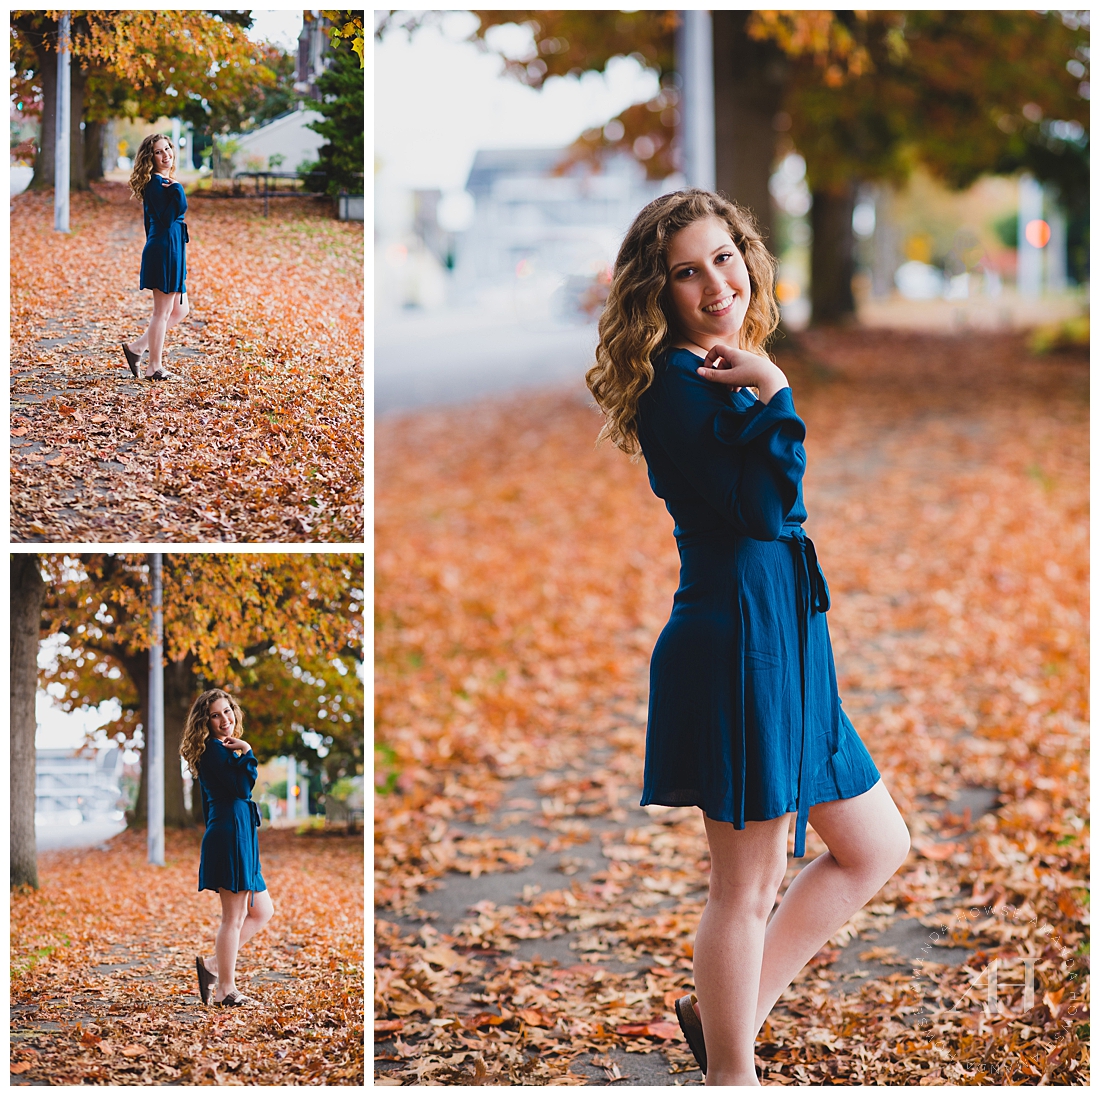 Autumn Senior Portraits with Autumn Leaves and Gorgeous Outfit Inspo | Photographed by Tacoma Senior Photographer Amanda Howse